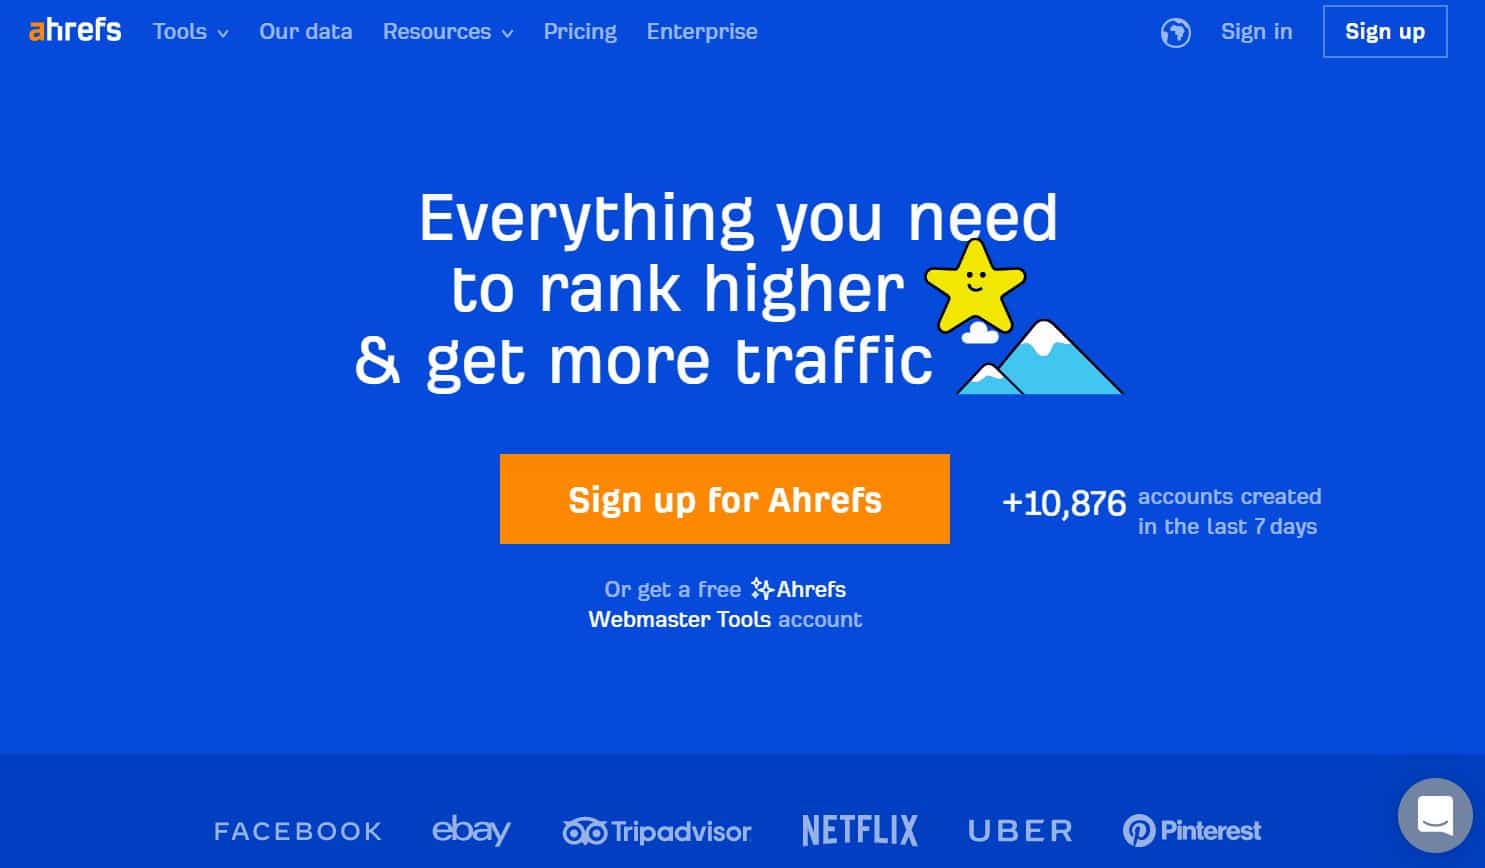 Homepage di Ahrefs con il motto "Everything you need to rank higher & get more traffic".